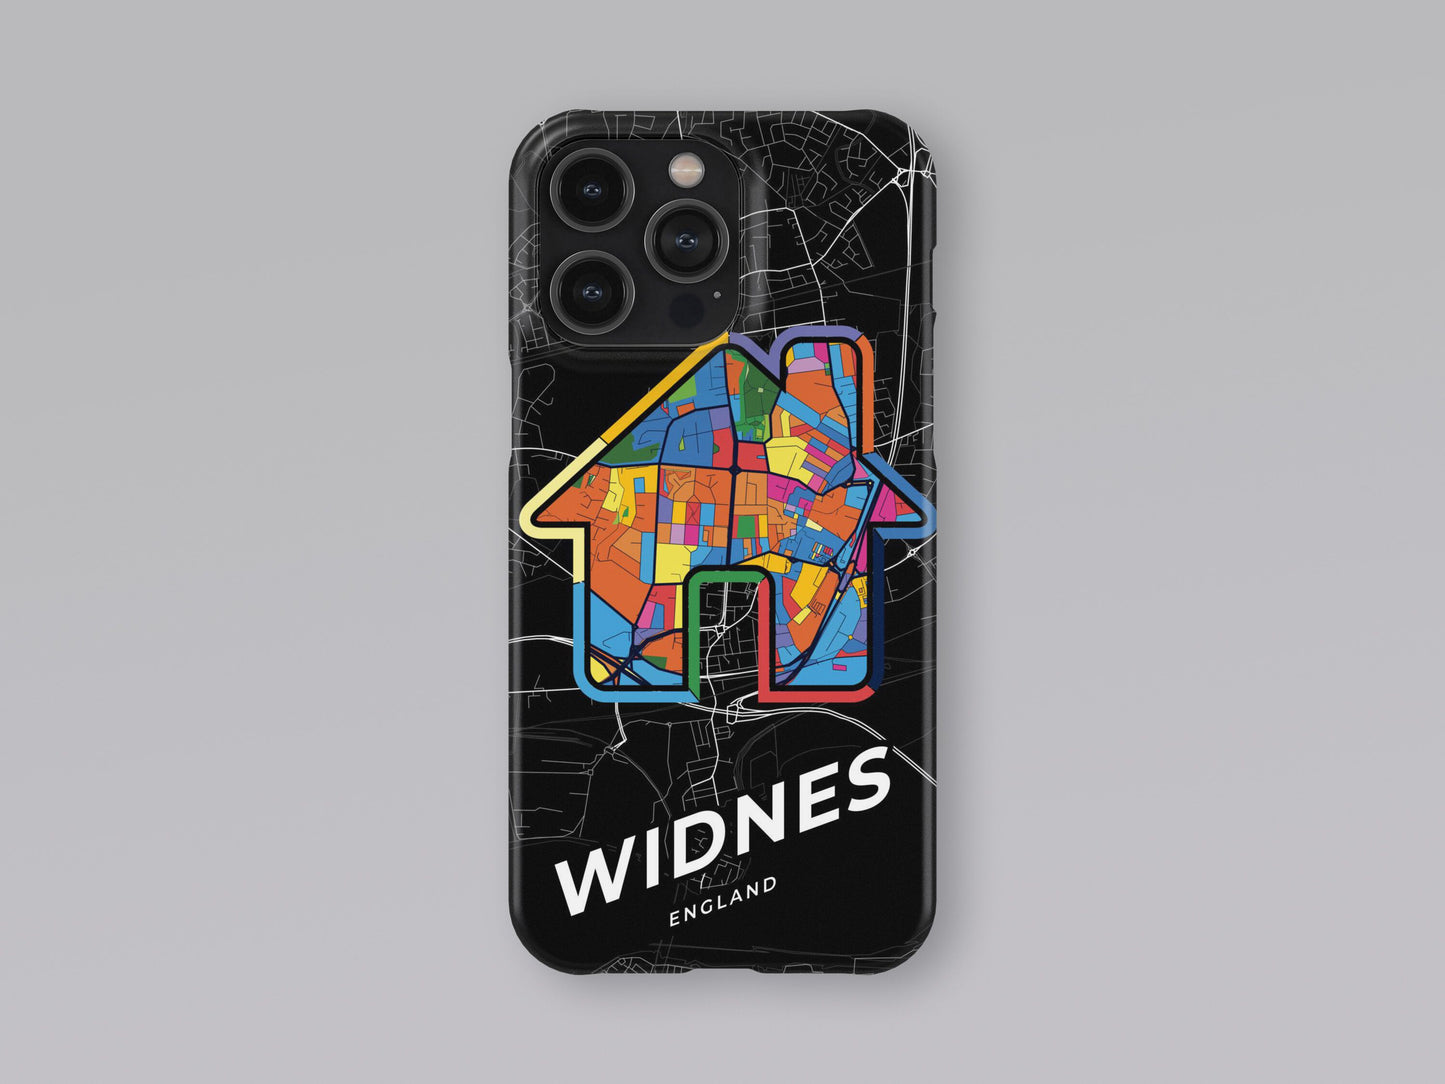 Widnes England slim phone case with colorful icon 3